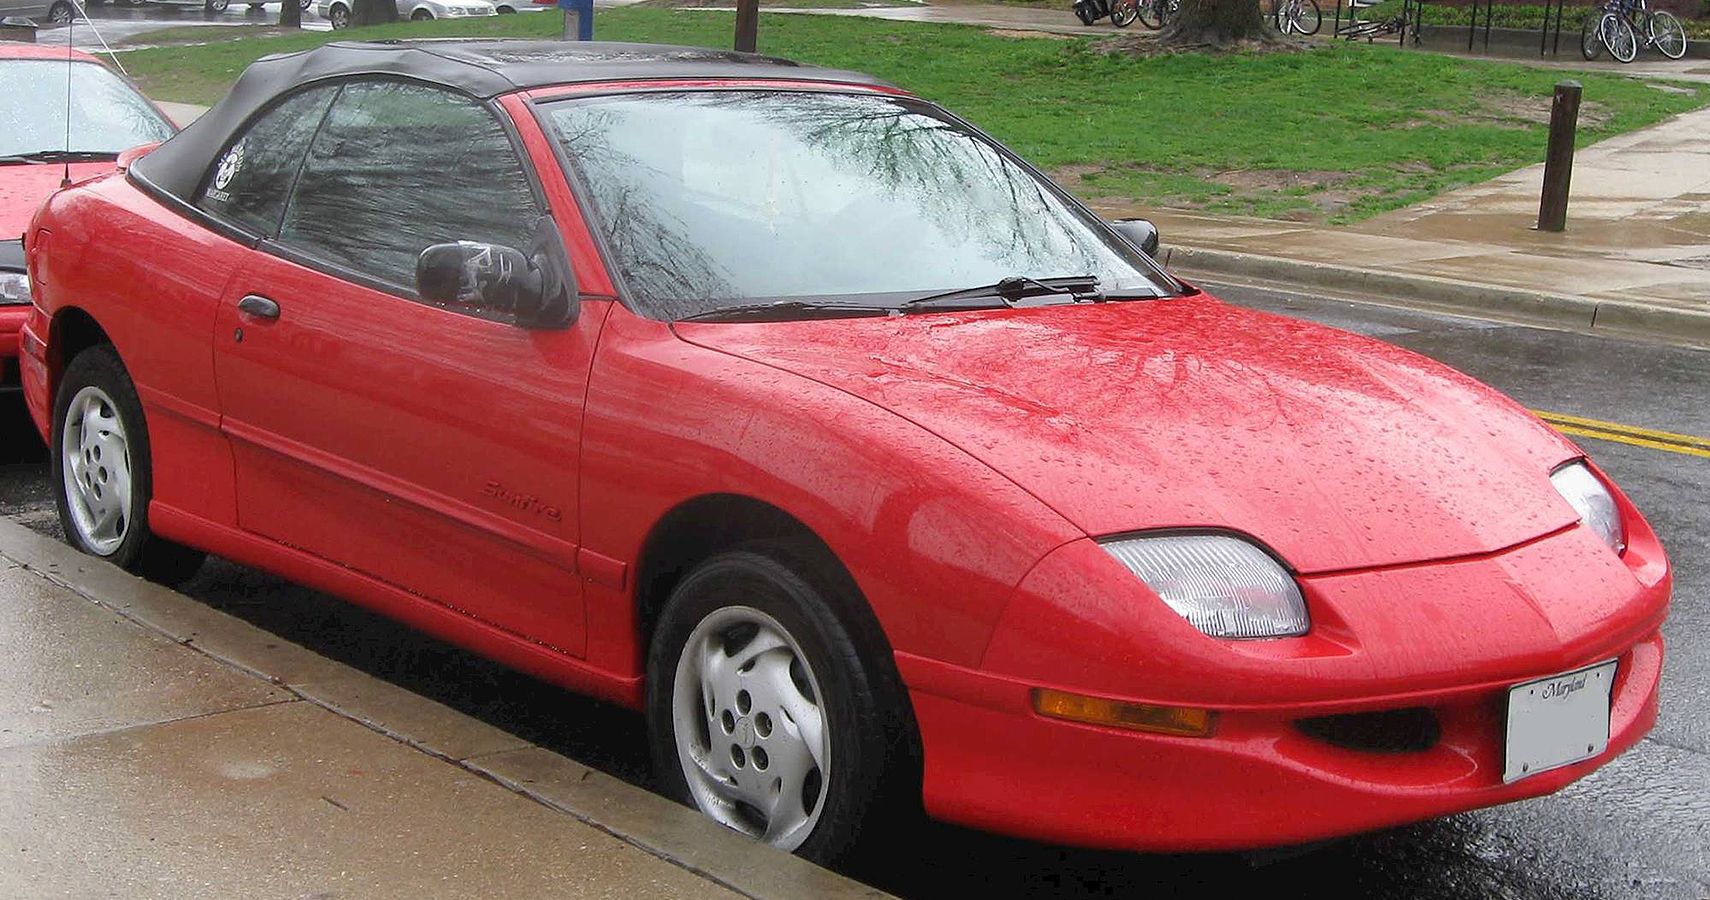 1995-2005 Pontiac Sunfire: Took Cues From The Chevy Cavalier